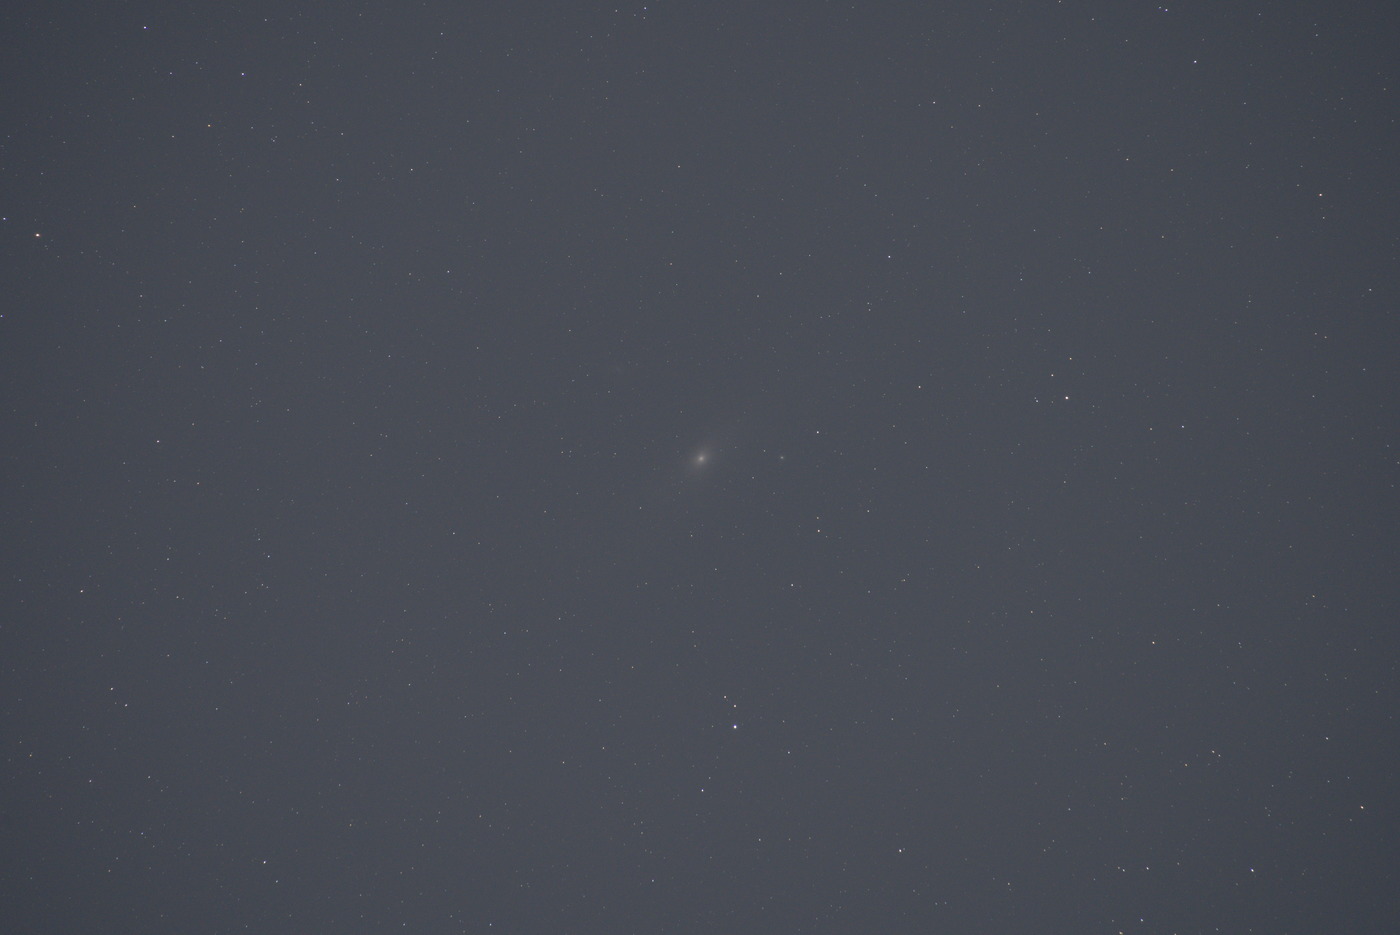 A 30s exposure light frame with my Tamron 70-300mm @ 300mm F/9 ISO 2000 pointed at M31 the Andromeda Galaxy.